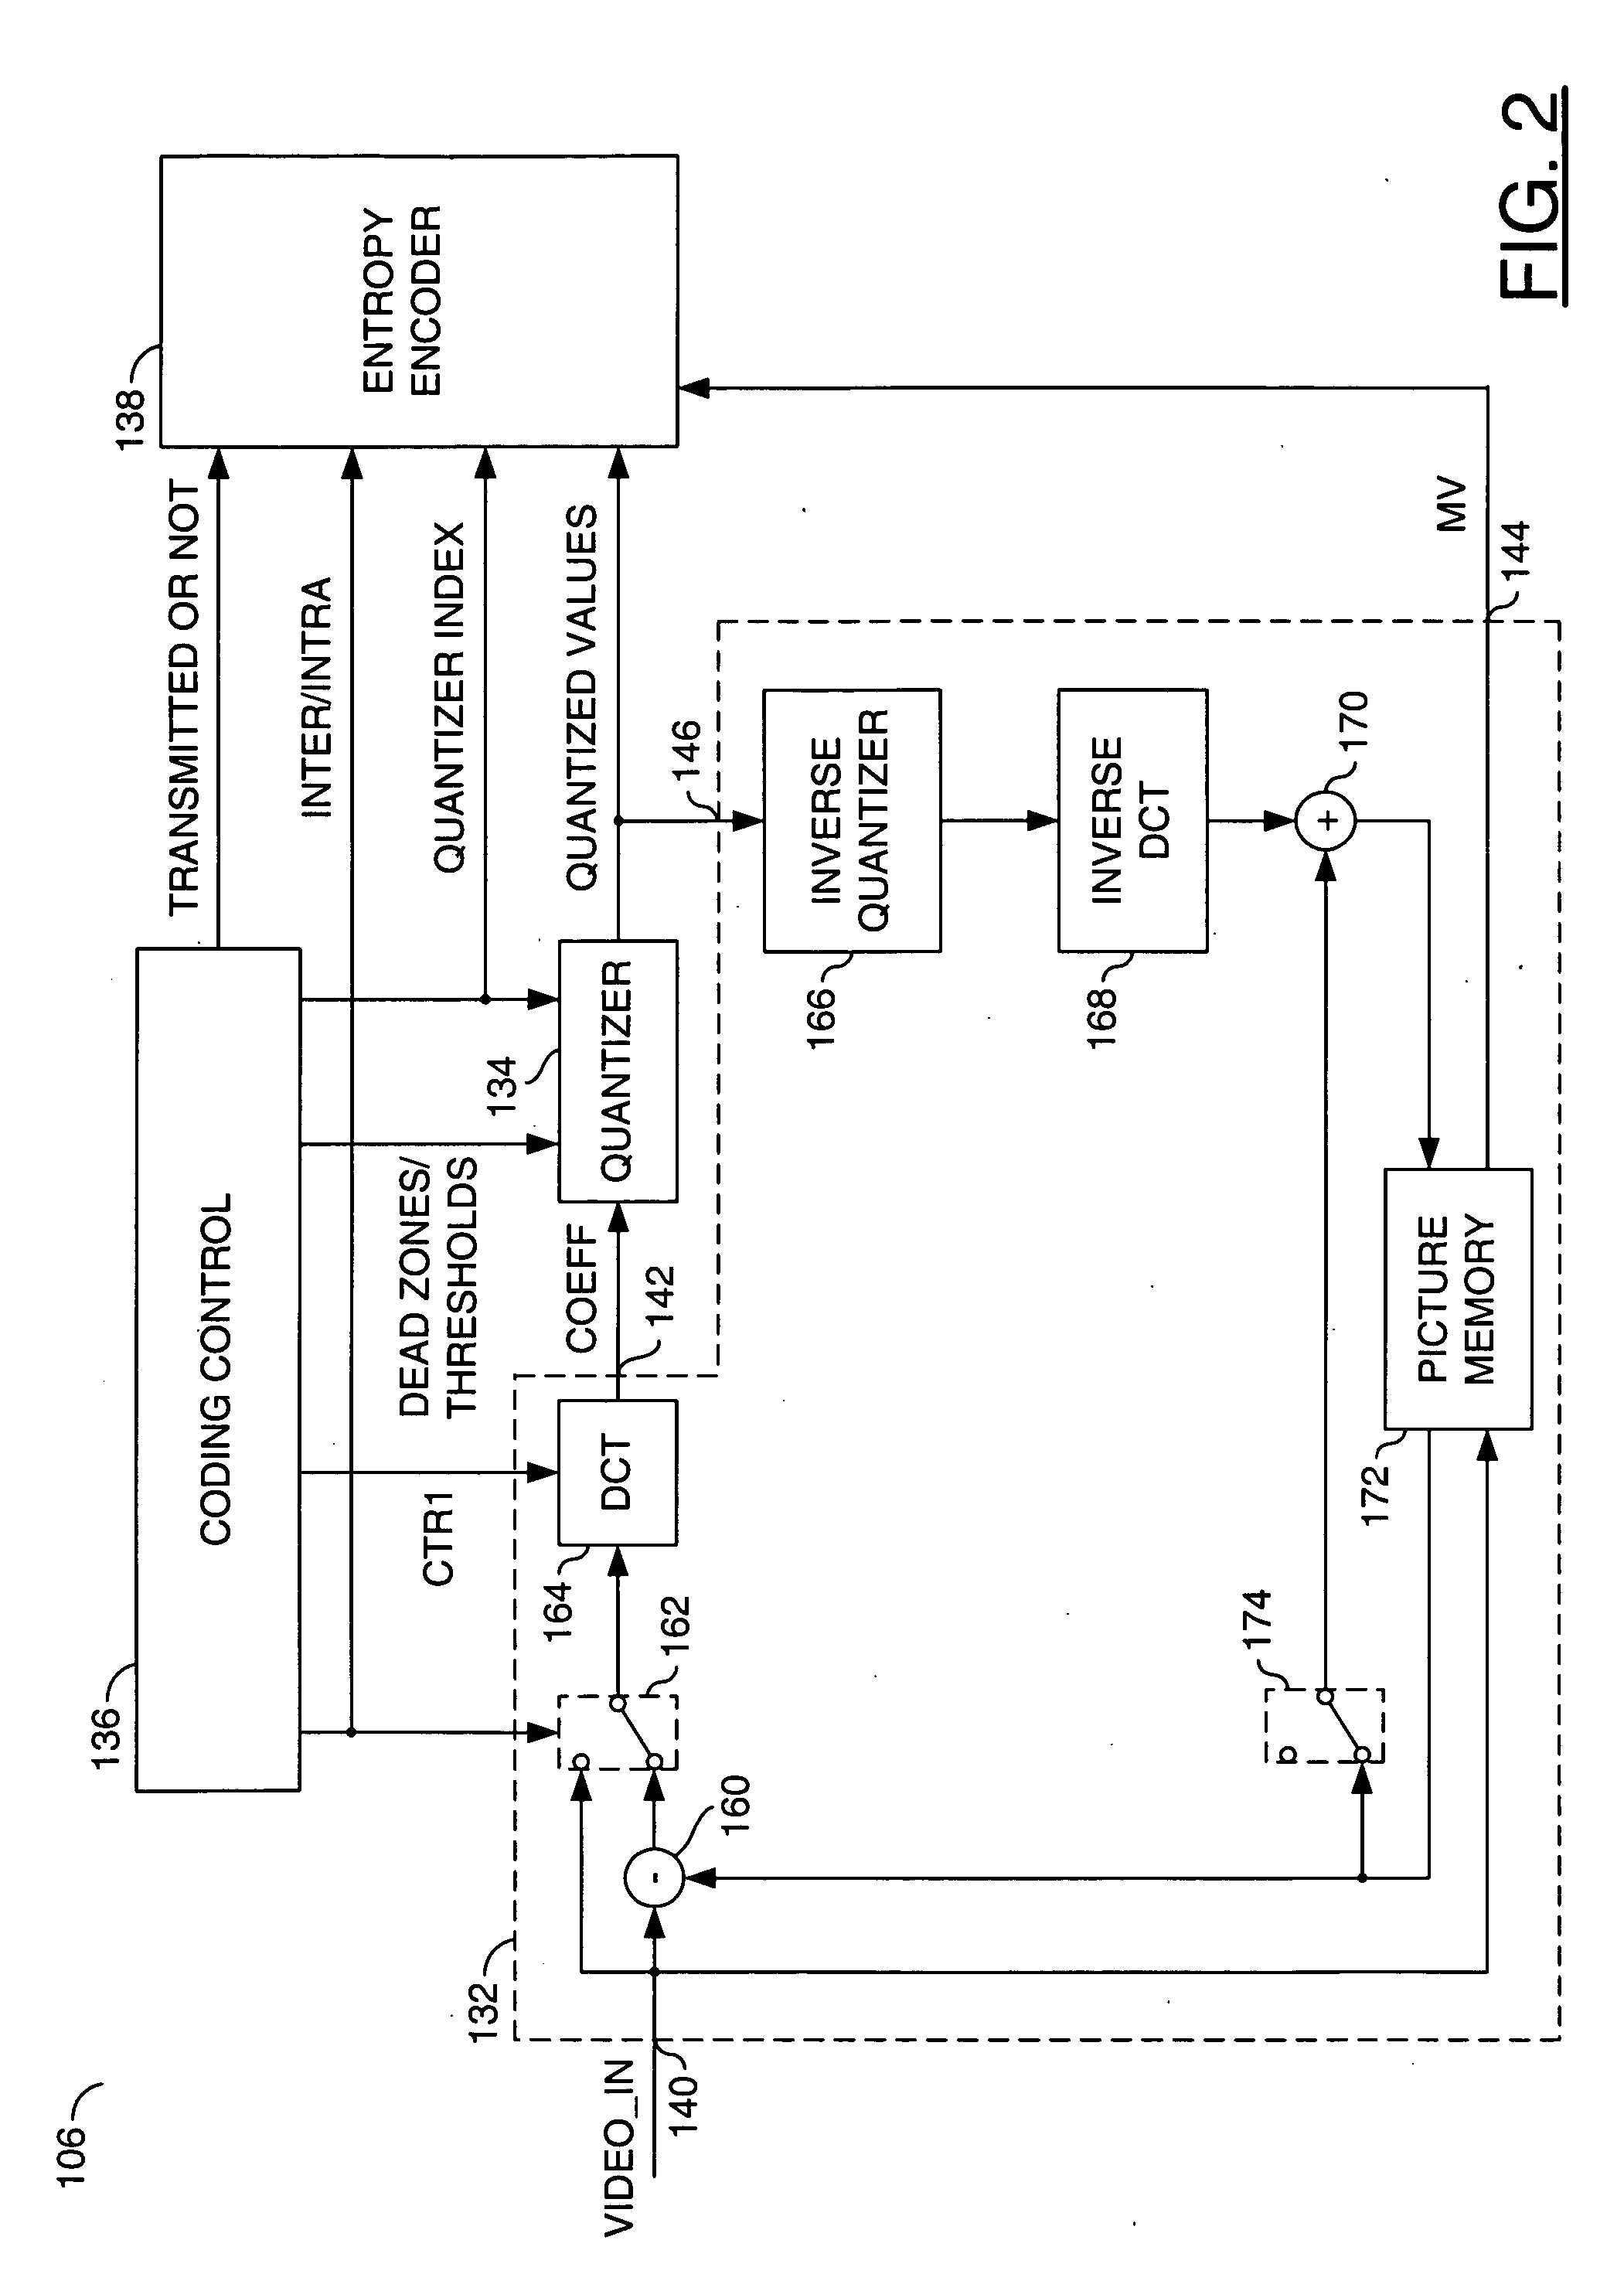 Programmable quantization dead zone and threshold for standard-based H.264 and/or VC1 video encoding